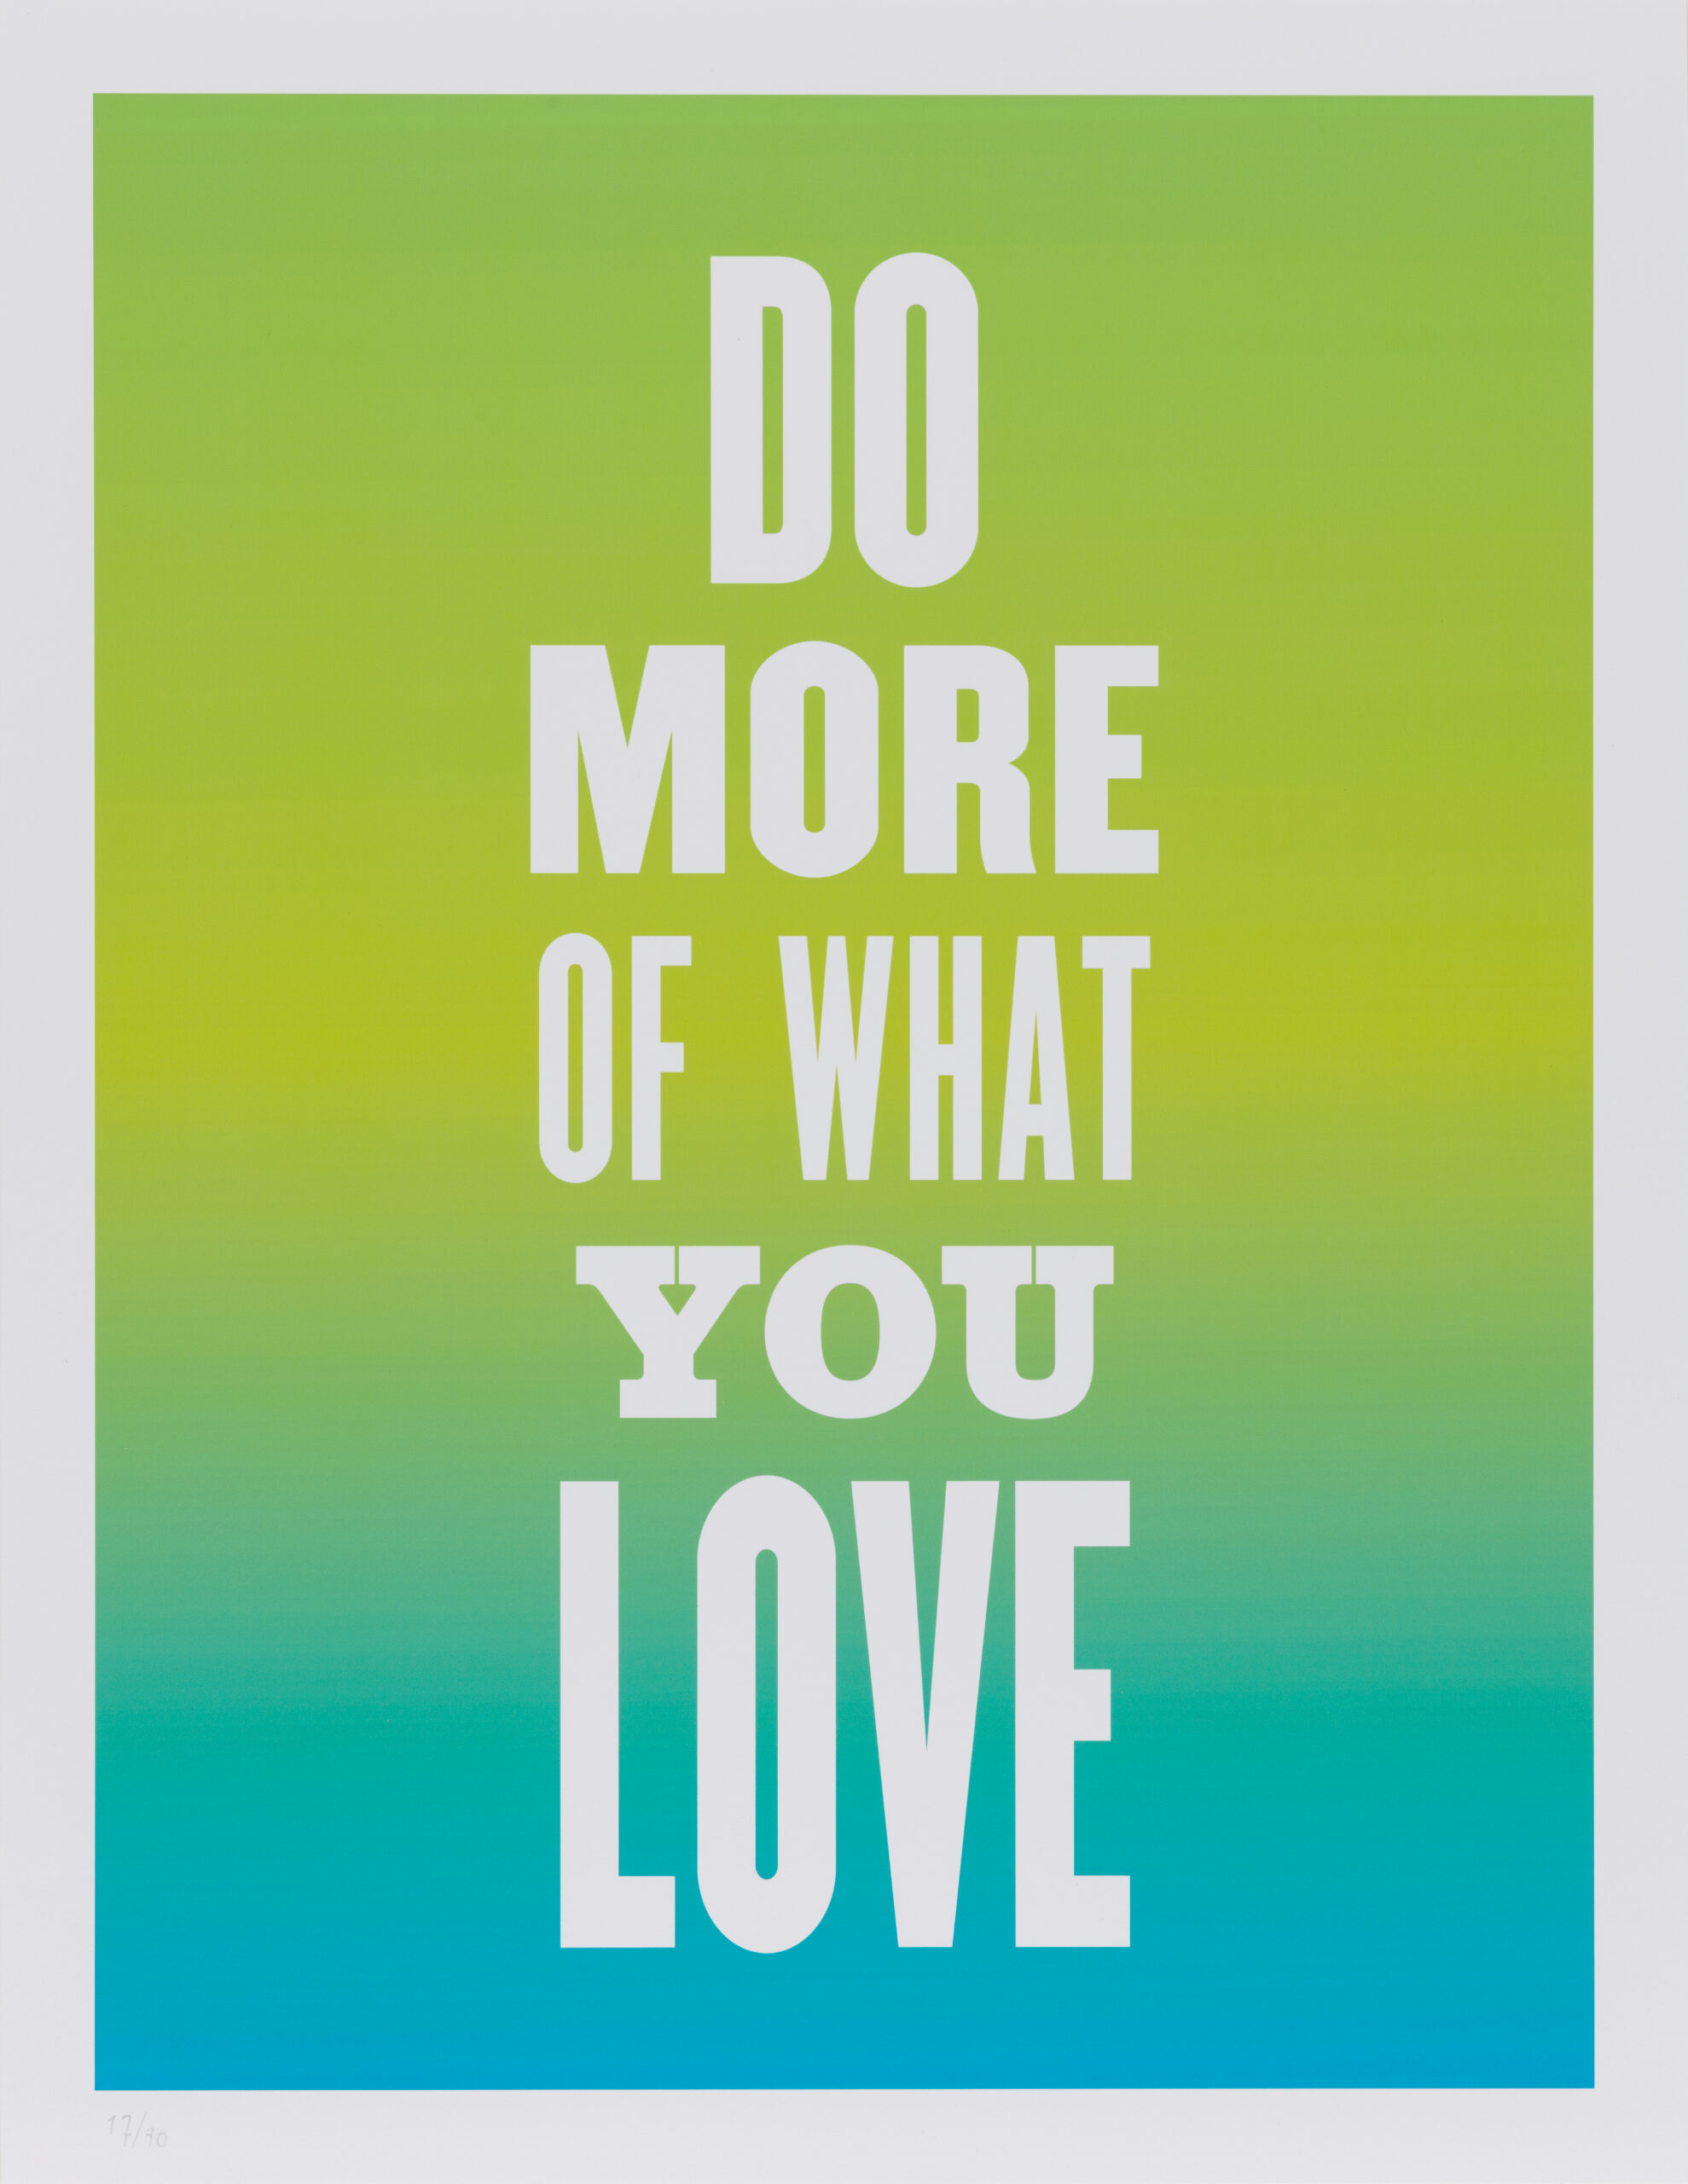 Do More of What You Love, from the series Advice from my 80 Year-Old-Self